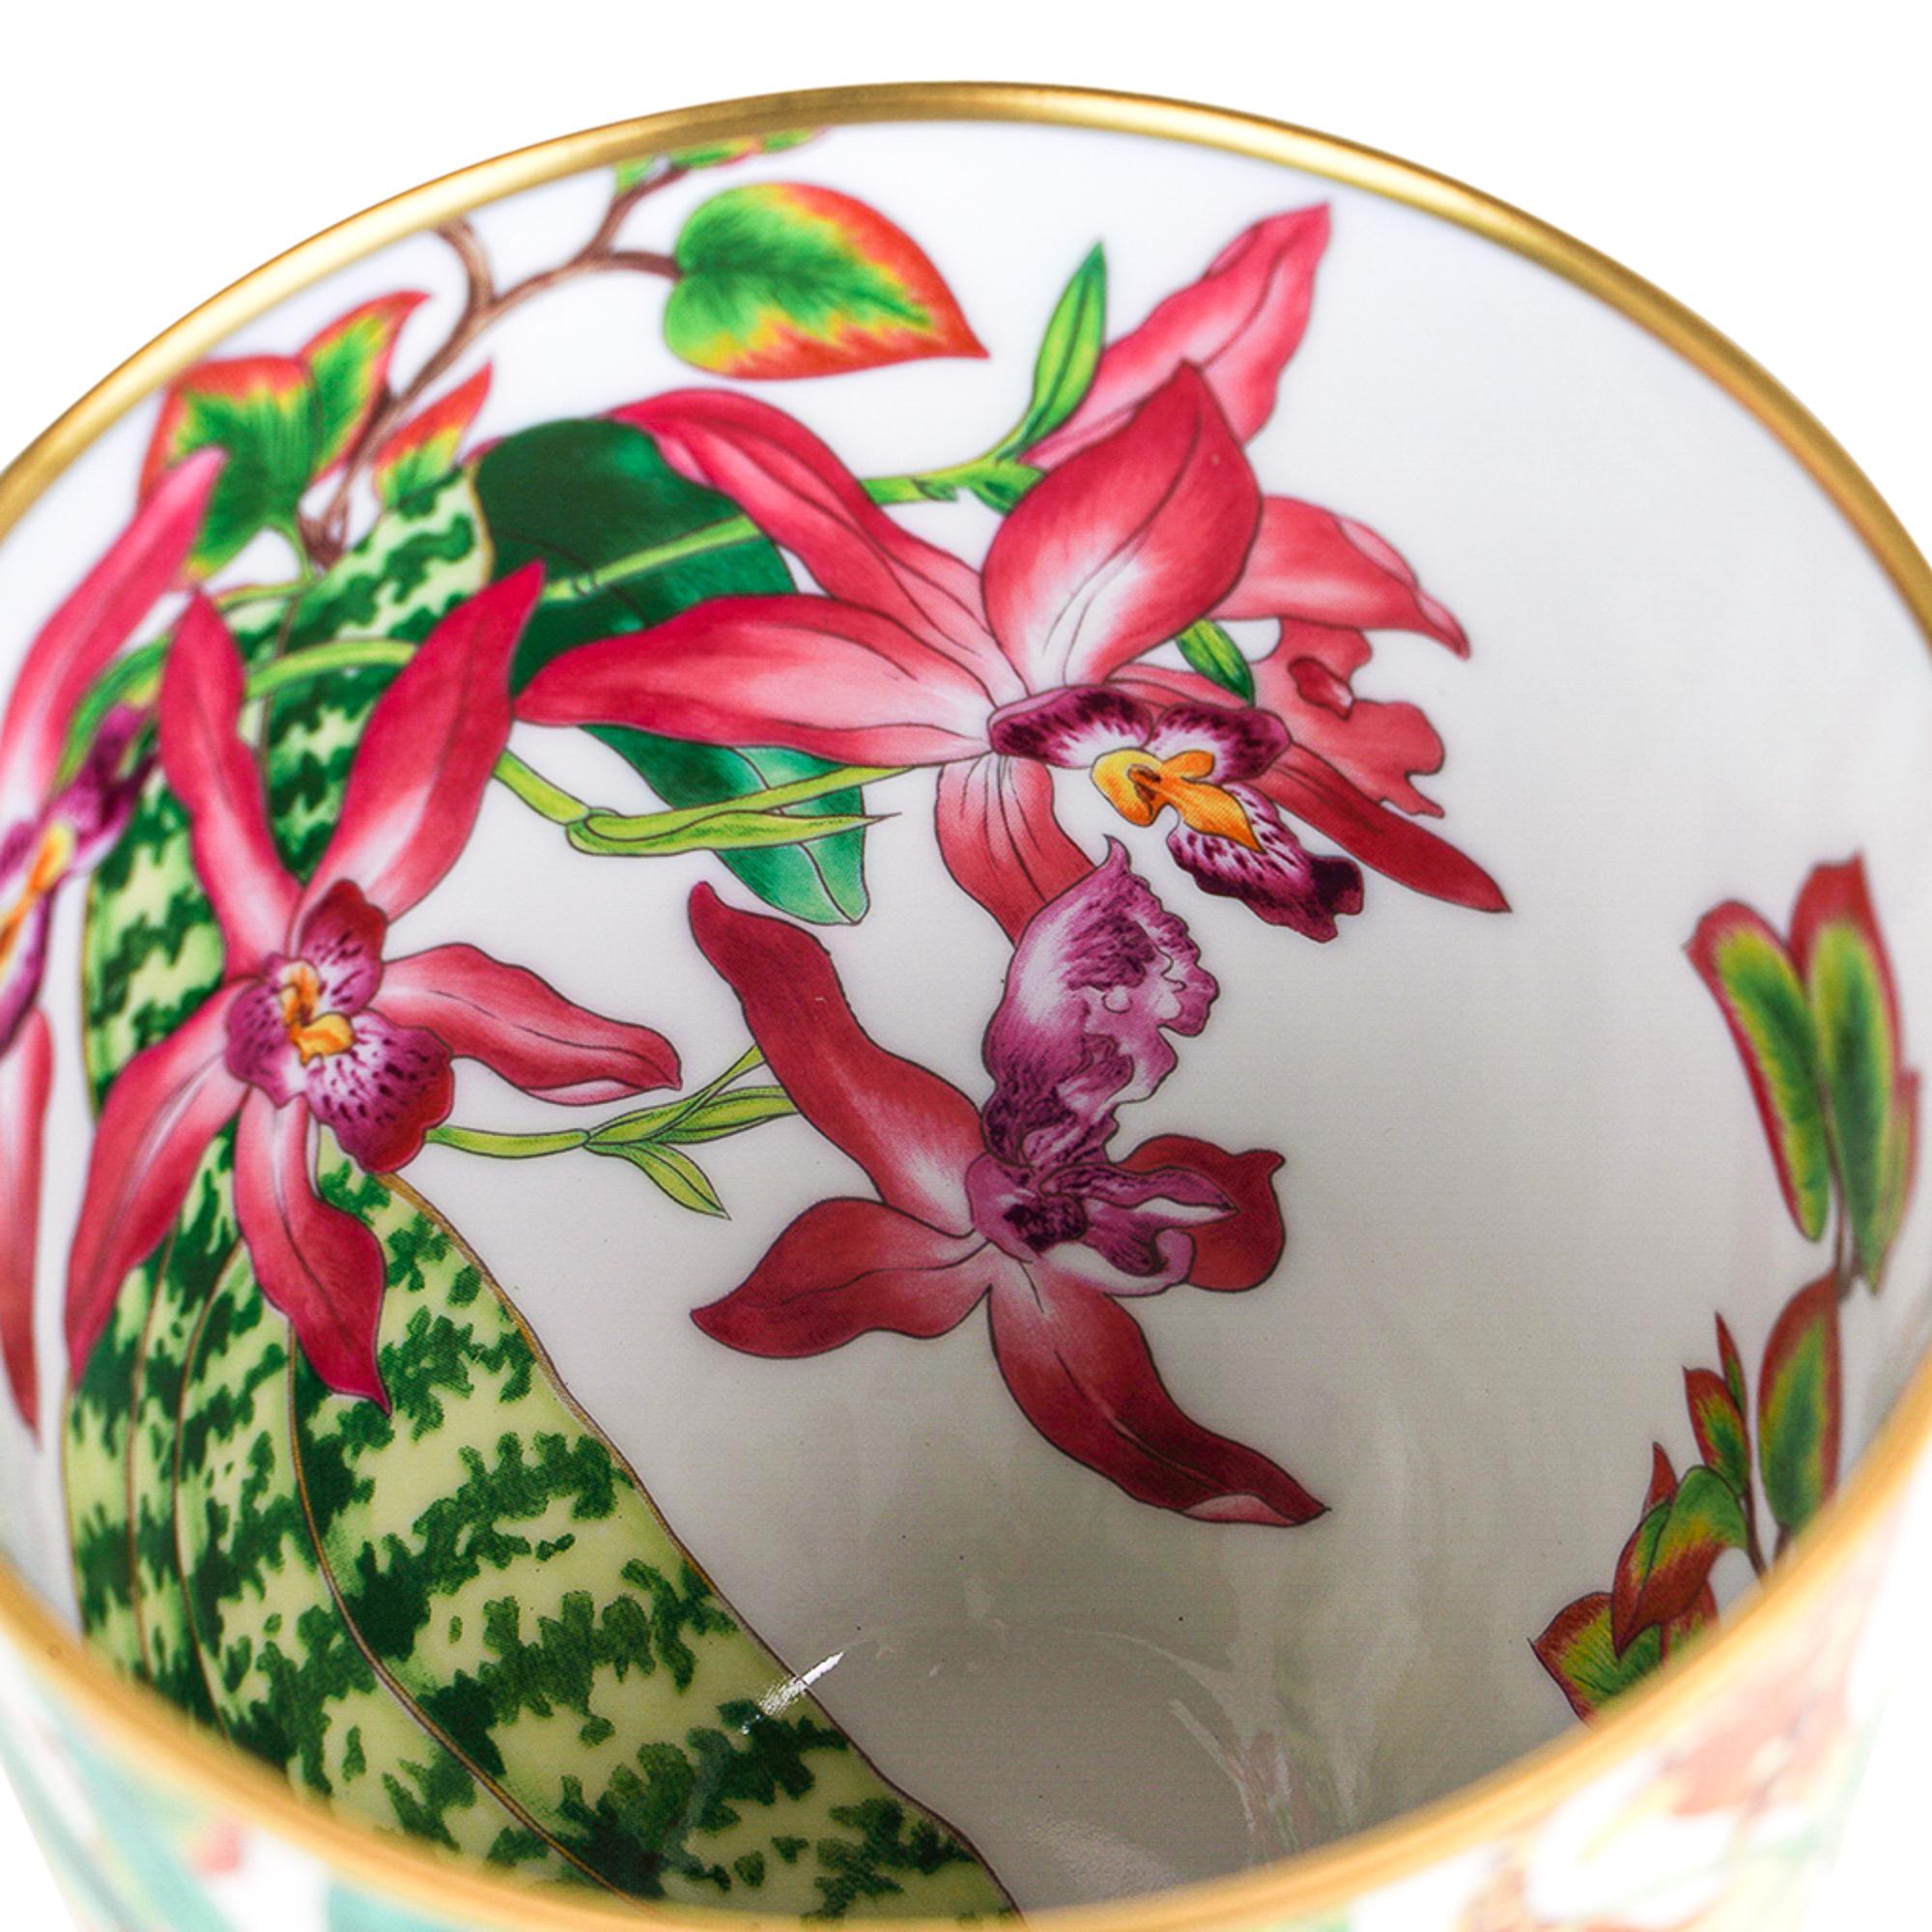 Mightychic offers an Hermes Mug featured in the classic Hermes Passifolia pattern.
A beautiful hommage to the peace and power of flora.
Decorated using Chromolithography.
Hand-painted 24K gold trim.
Beautiful mug to use with the Passifolia